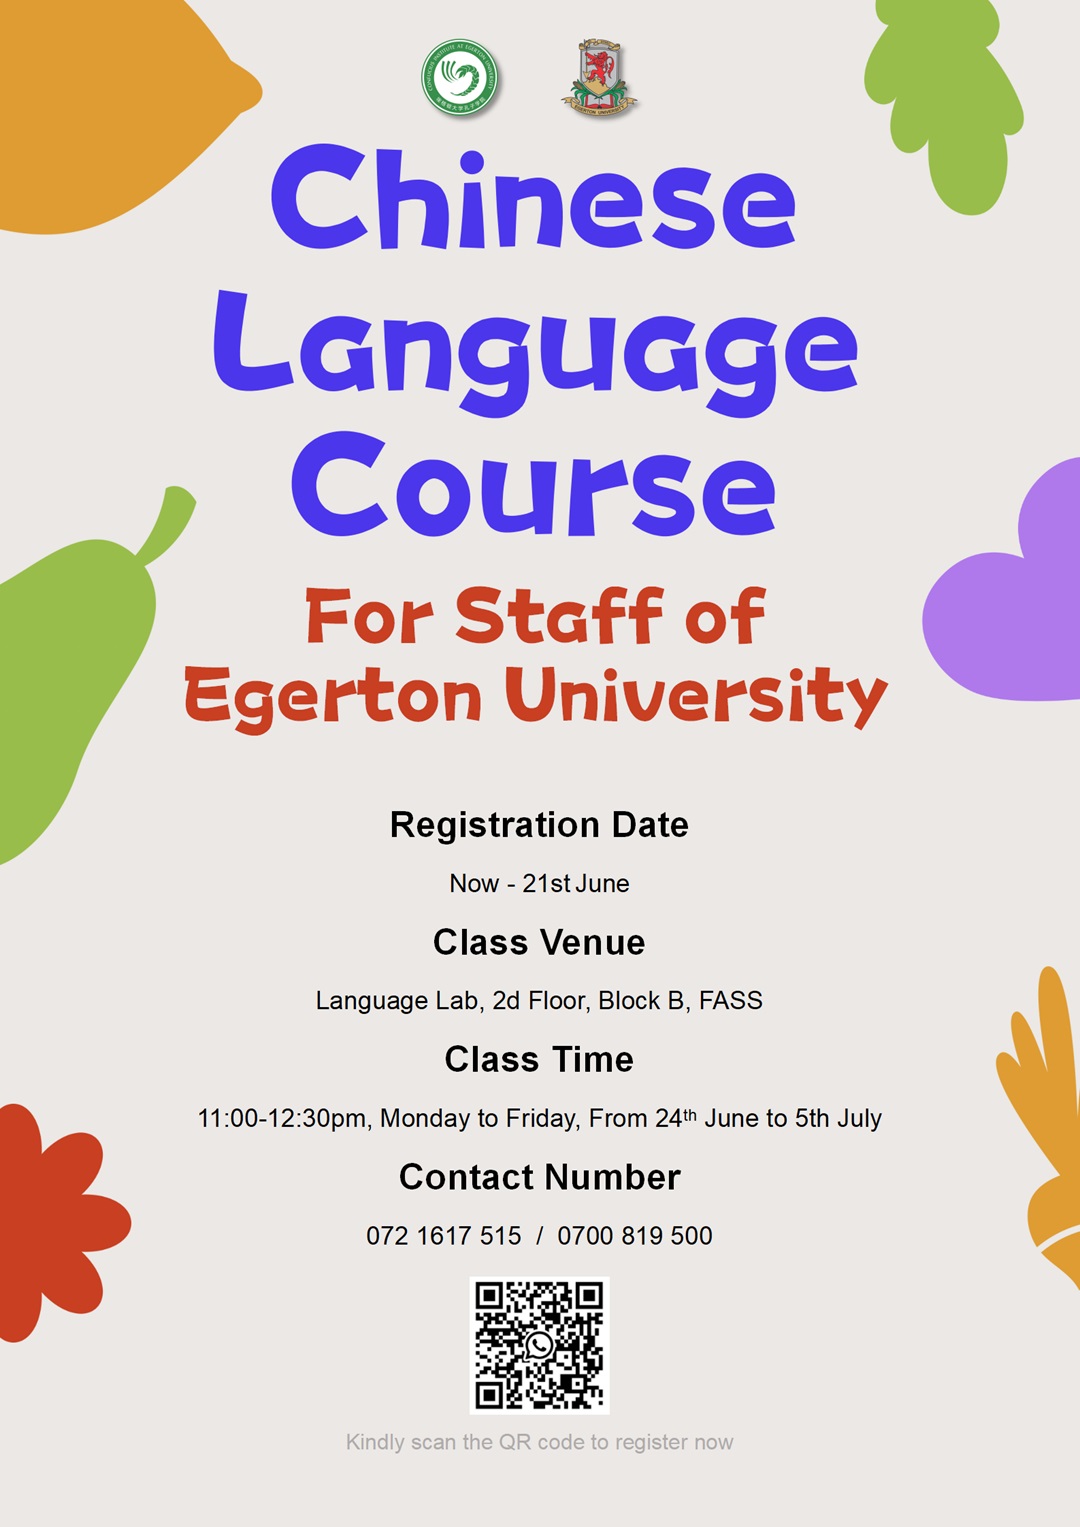 Chinese Language Course for staff of Egerton University